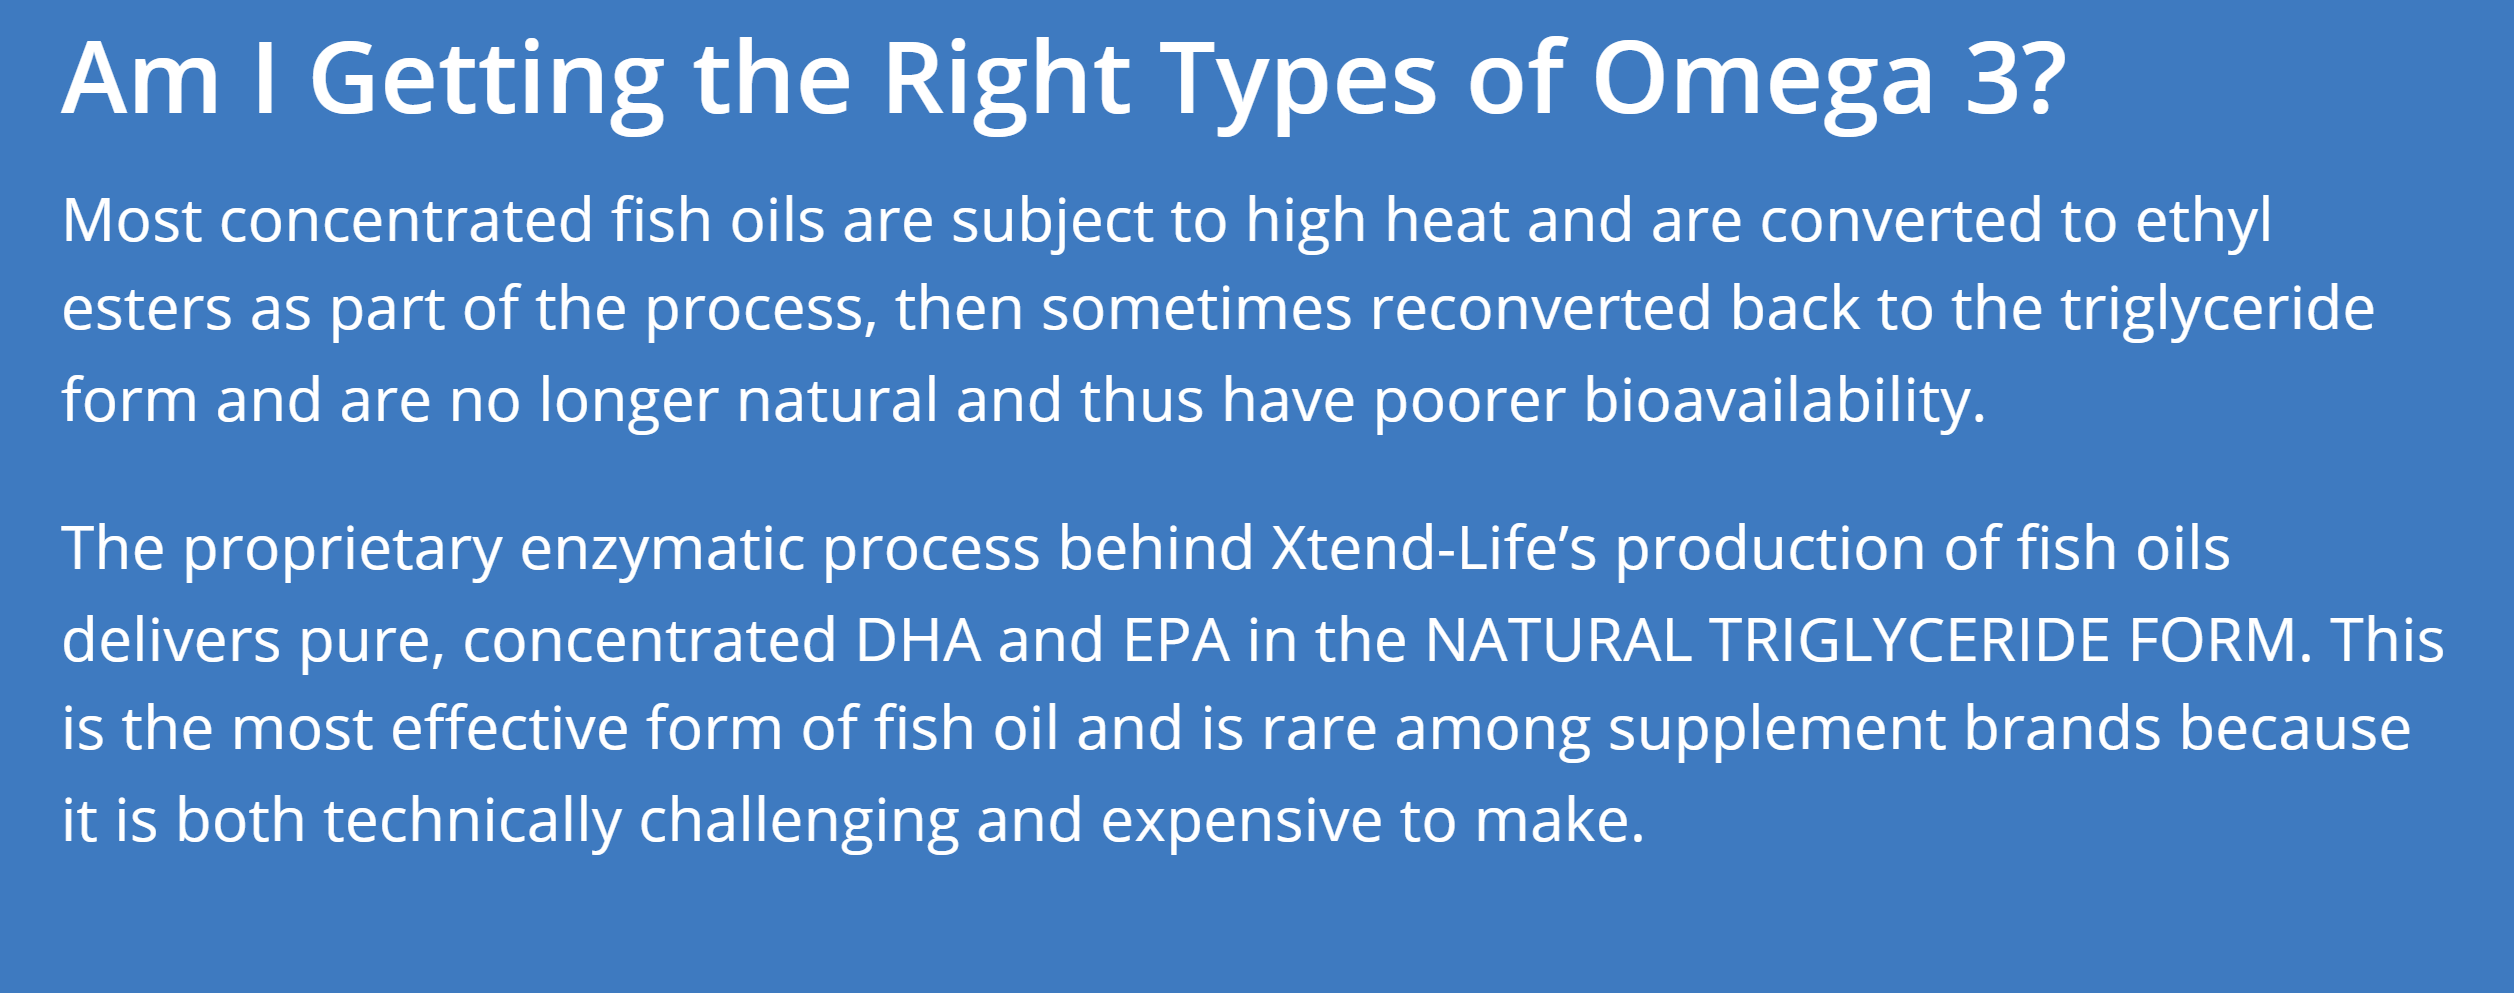 you need to right type of fish oil